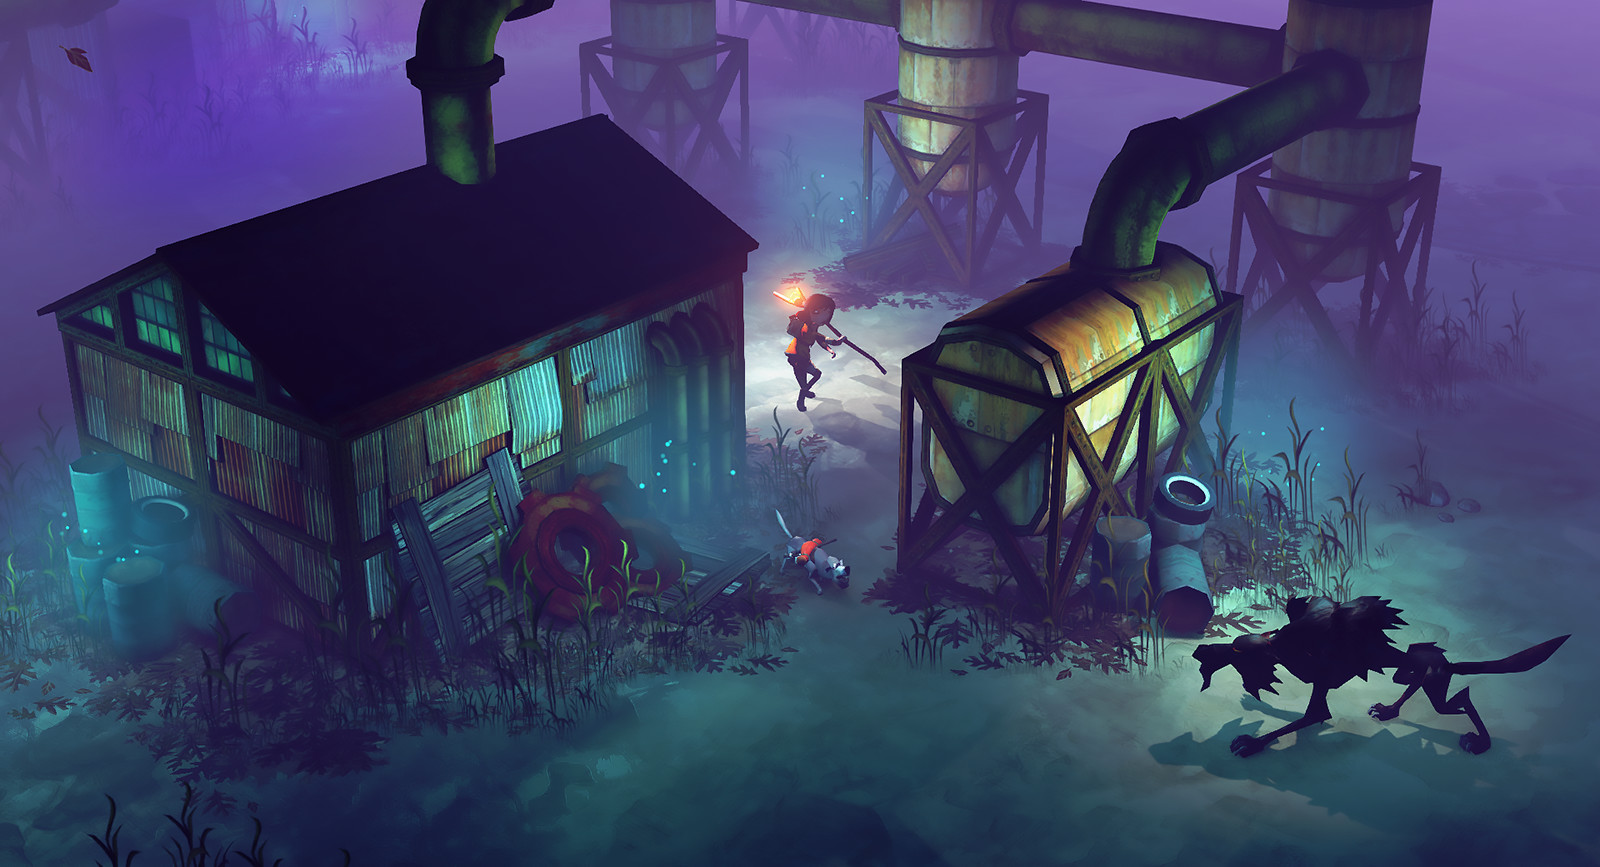 Find the best laptops for The Flame in the Flood